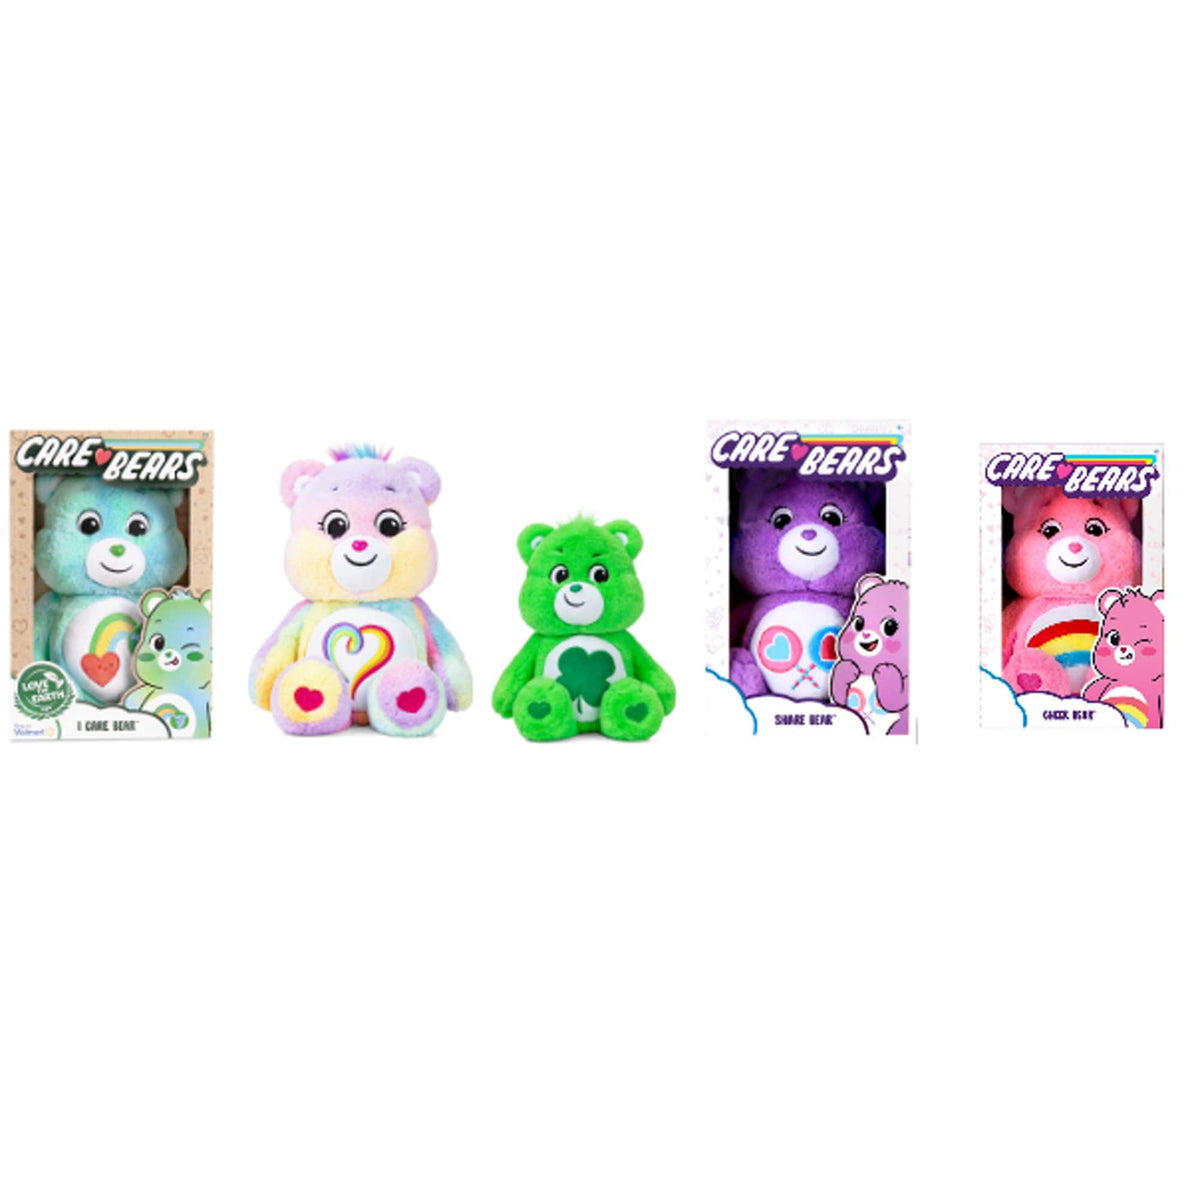 GROUPE RICOCHET Plushes Care Bears Plush, 14 Inches, Assortment, 1 Count